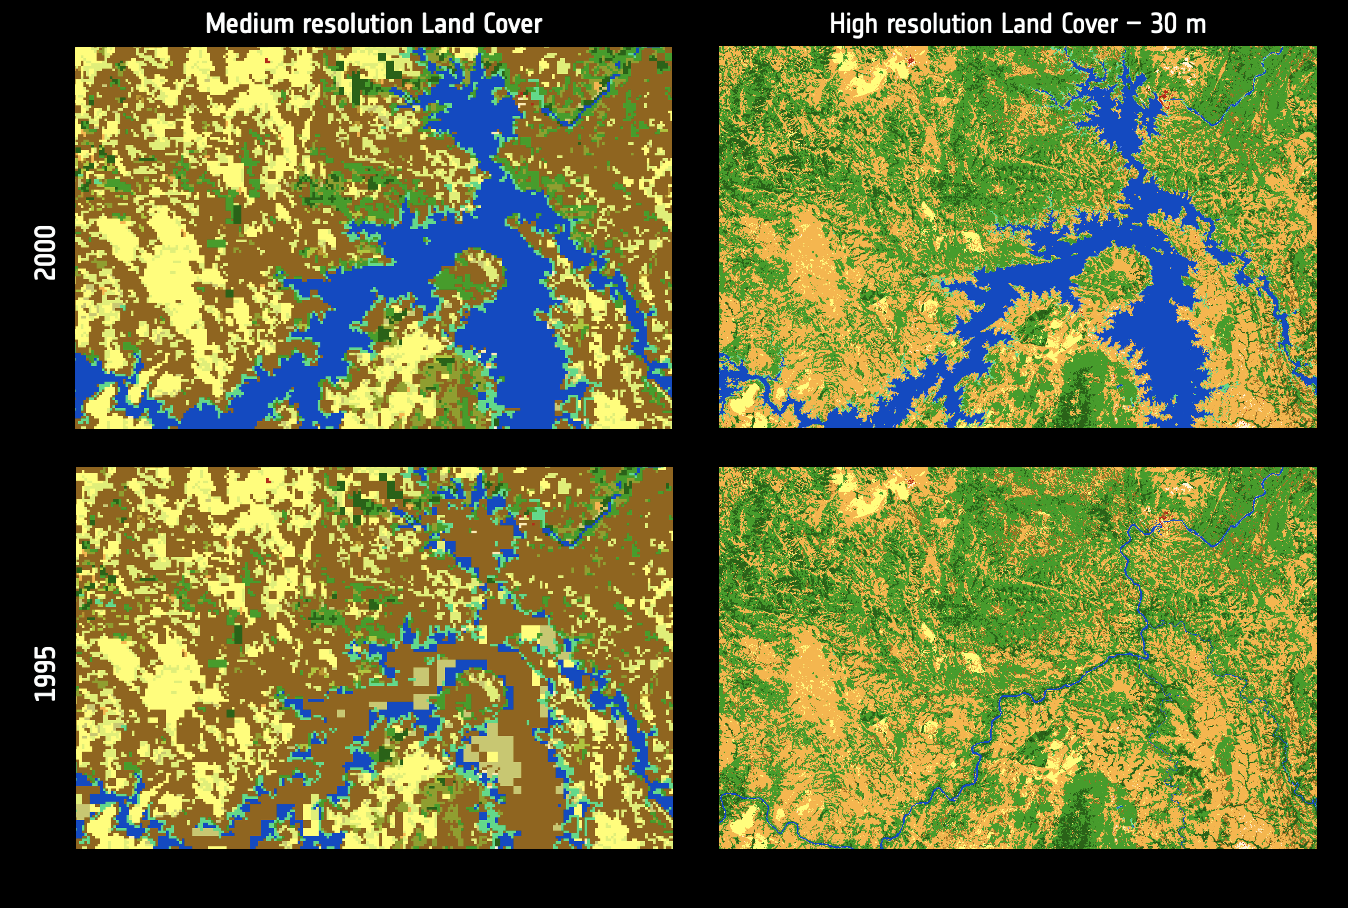 Land cover change maps: a comparison of the ESA CCI's Medium resolution land cover product (left) & High resolution land cover change (30 m resolution) (right) products